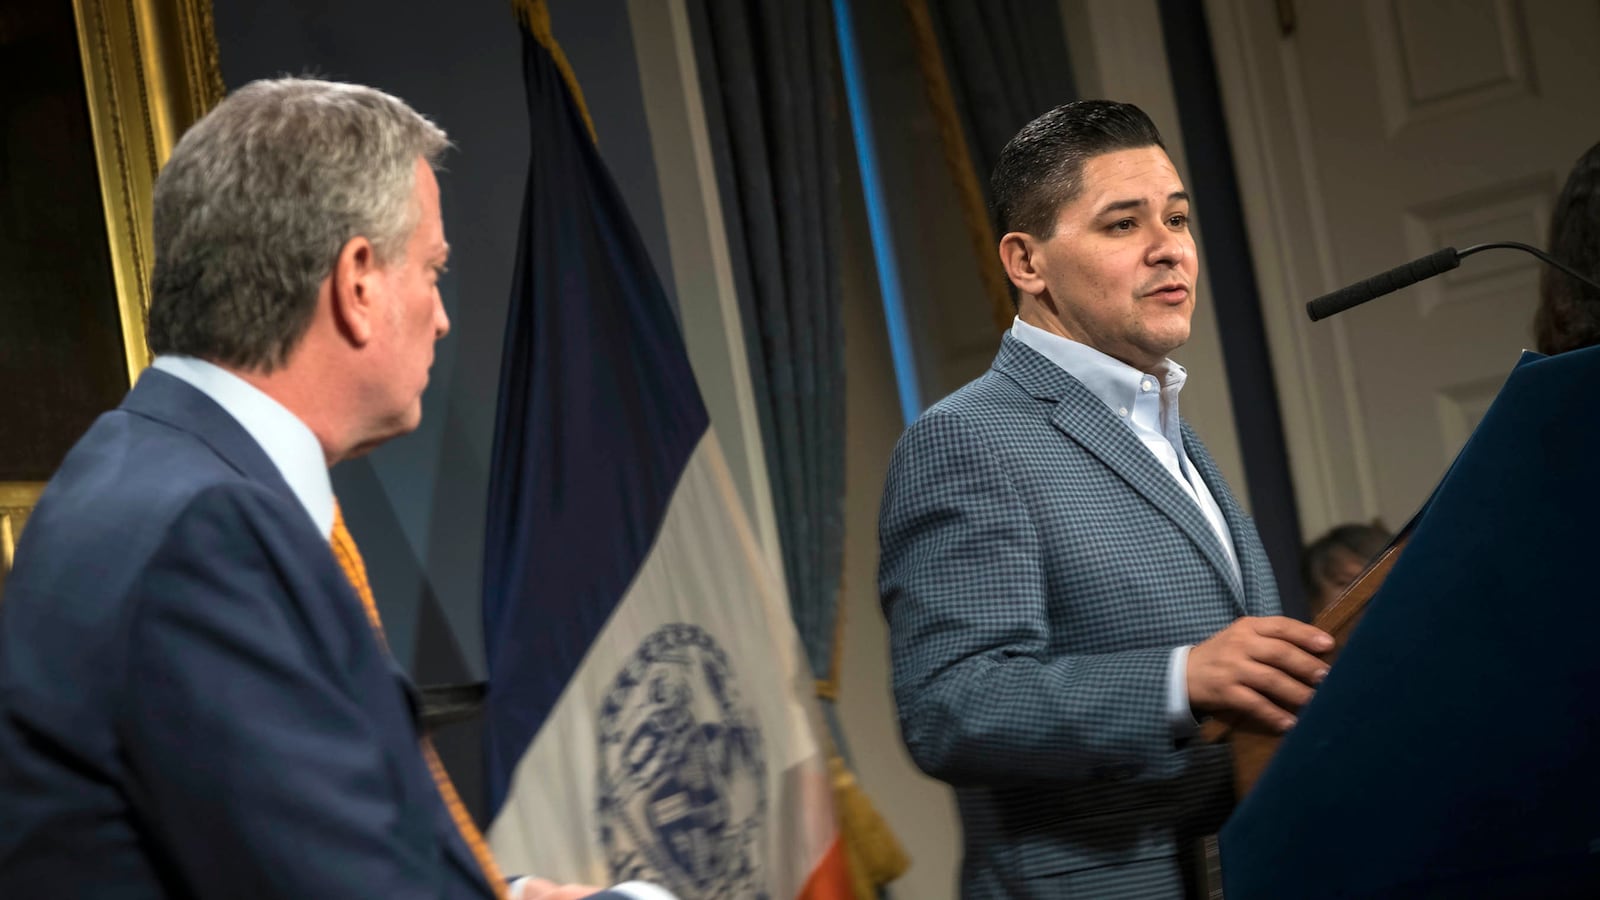 Mayor Bill de Blasio and schools Chancellor Richard Carranza announced Sunday evening that New York City schools would close and shift to online learning amid the new coronavirus outbreak.